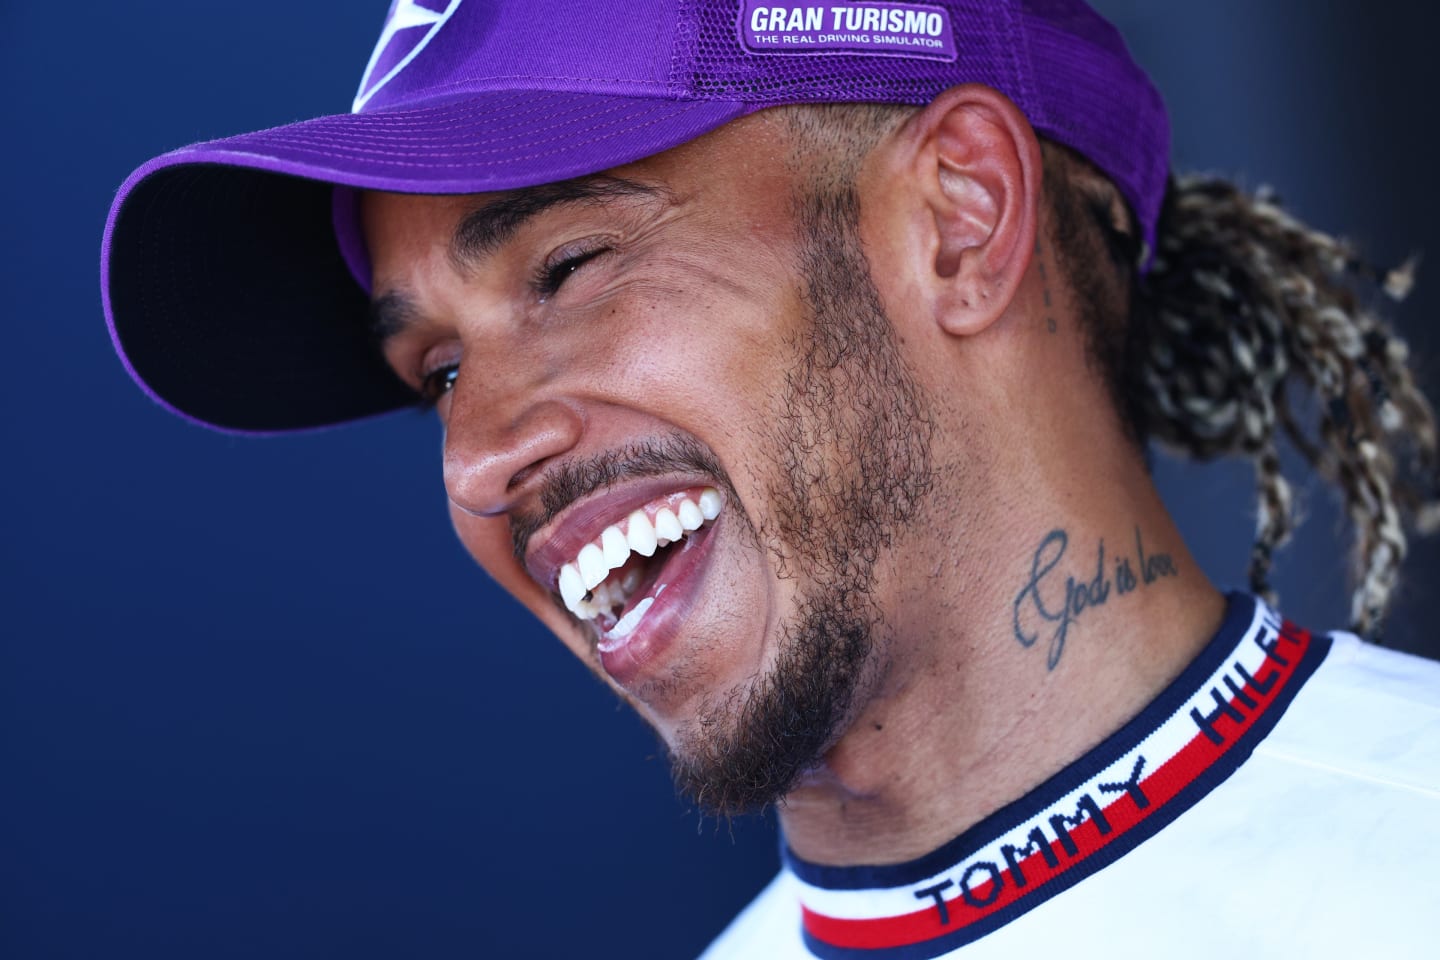 LE CASTELLET, FRANCE - JULY 24: Second placed Lewis Hamilton of Great Britain and Mercedes talks to the media after the F1 Grand Prix of France at Circuit Paul Ricard on July 24, 2022 in Le Castellet, France. (Photo by Clive Rose/Getty Images)